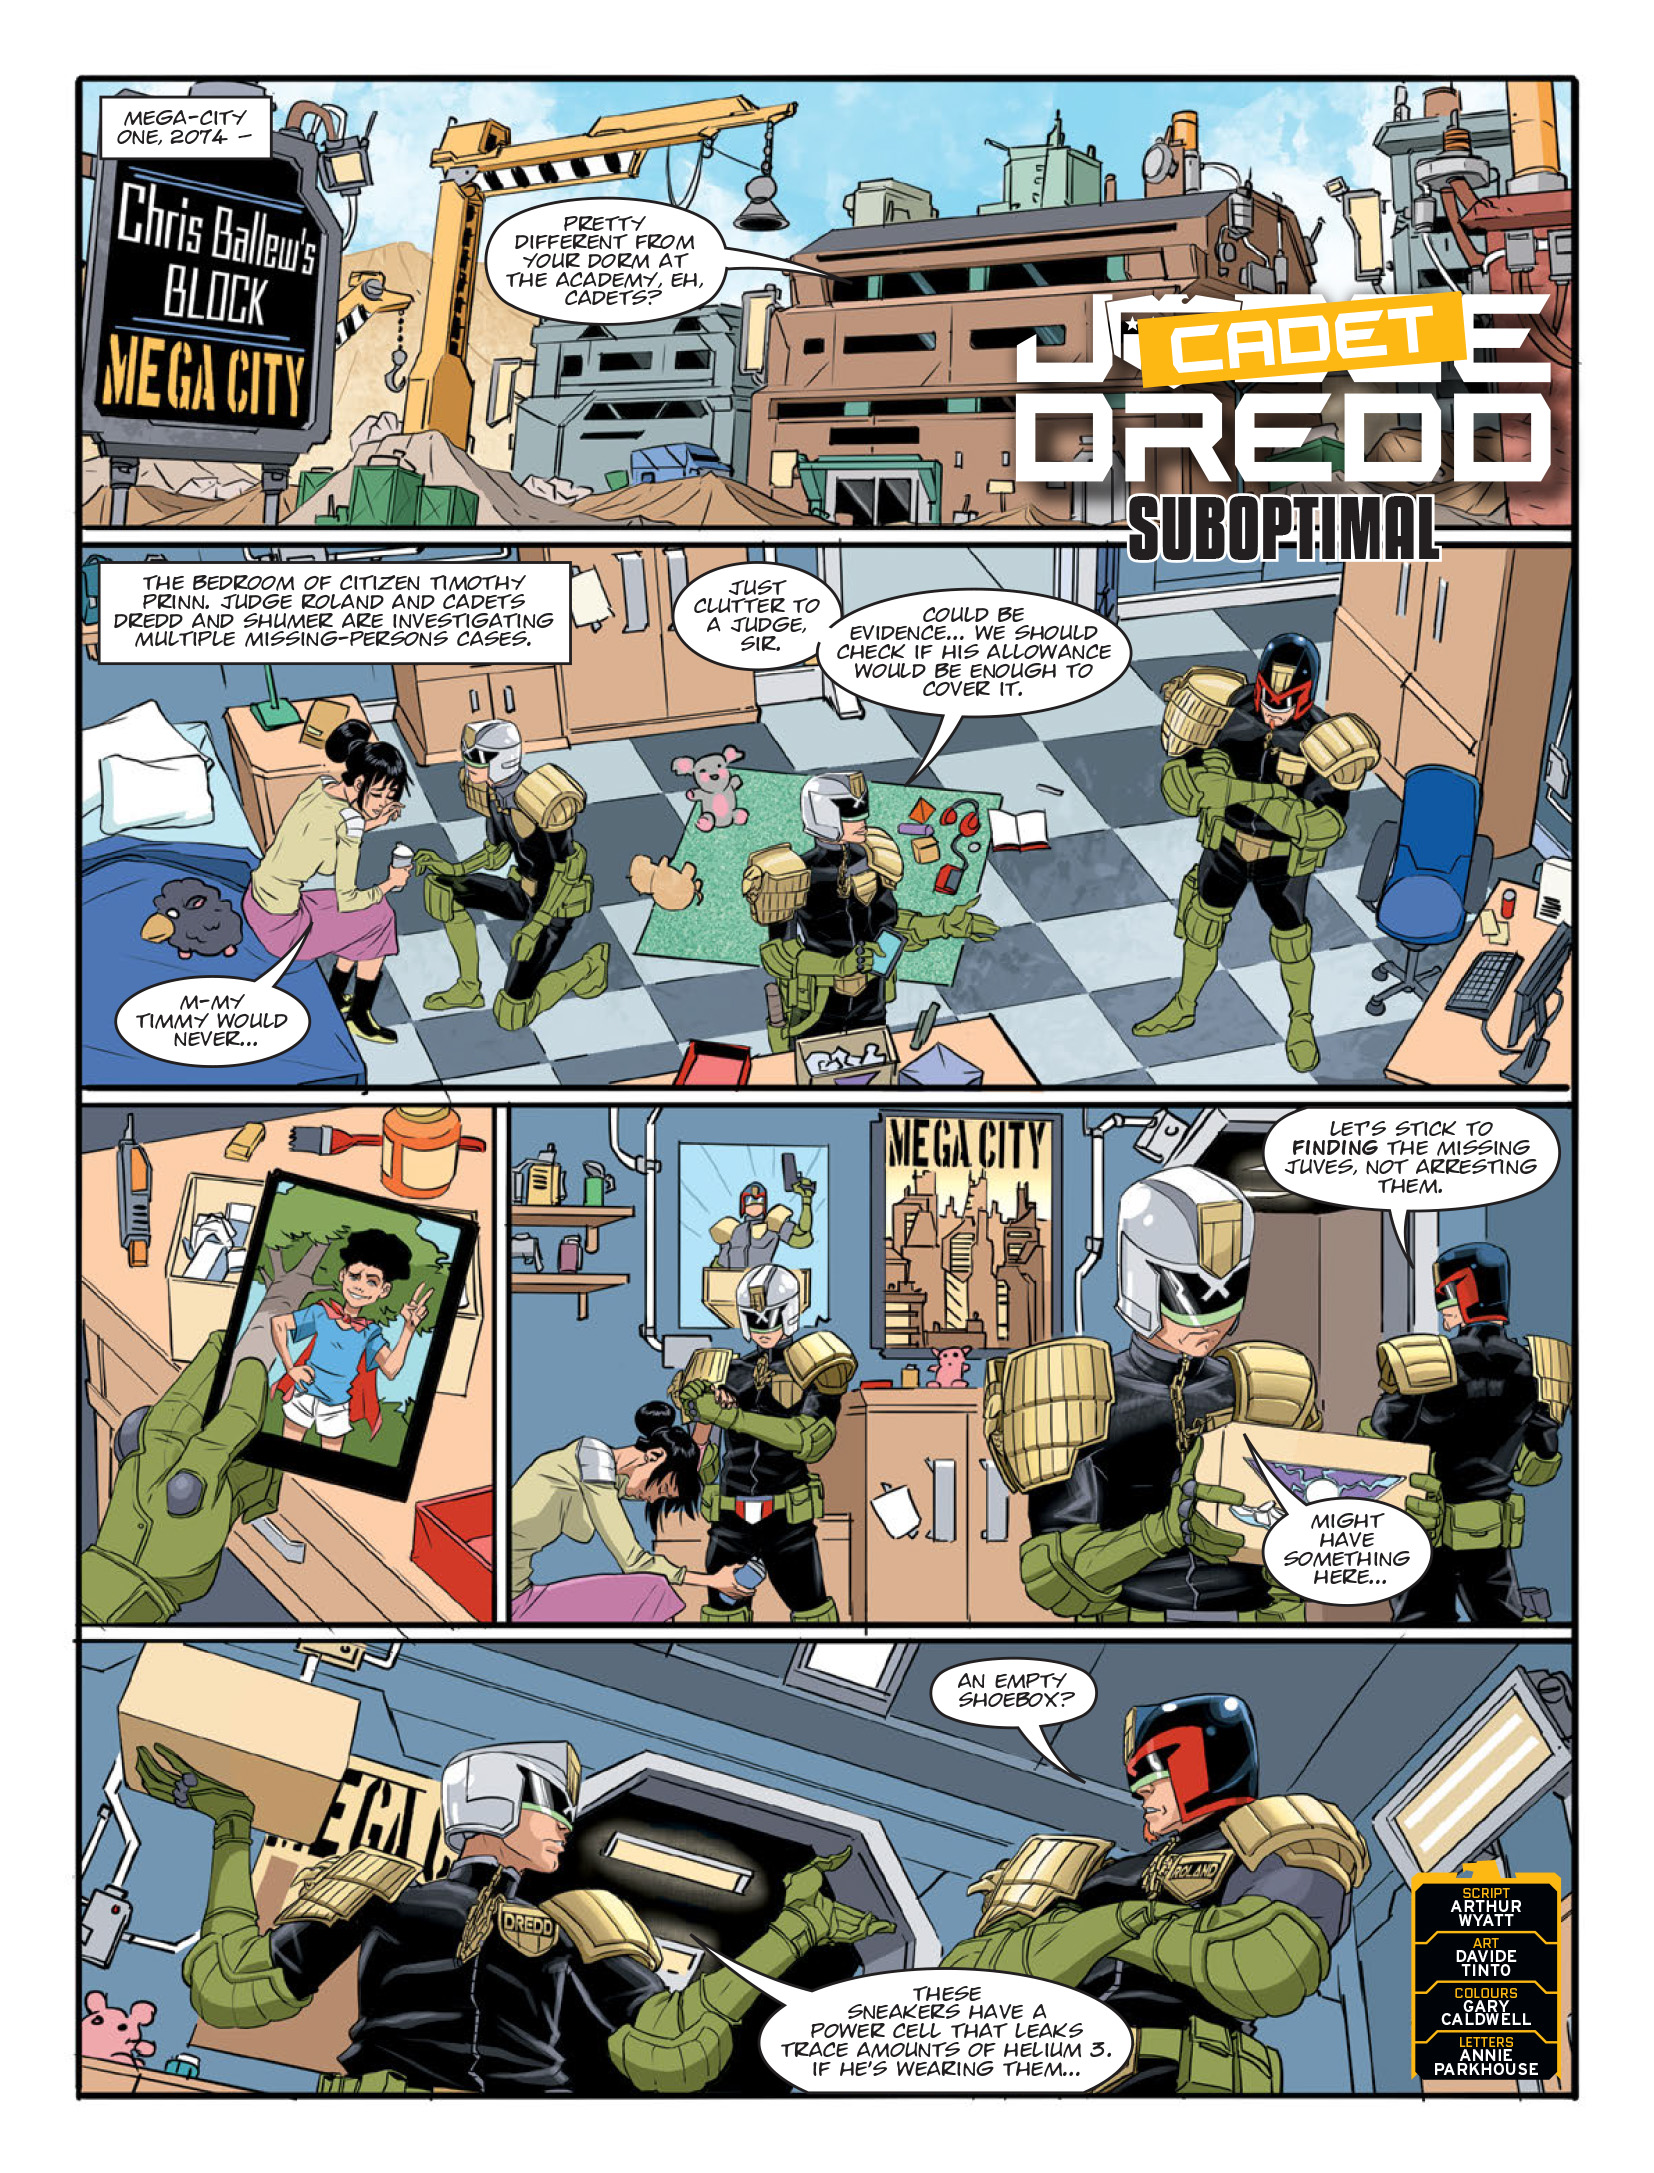 2000 AD: Chapter 2220 - Page 3